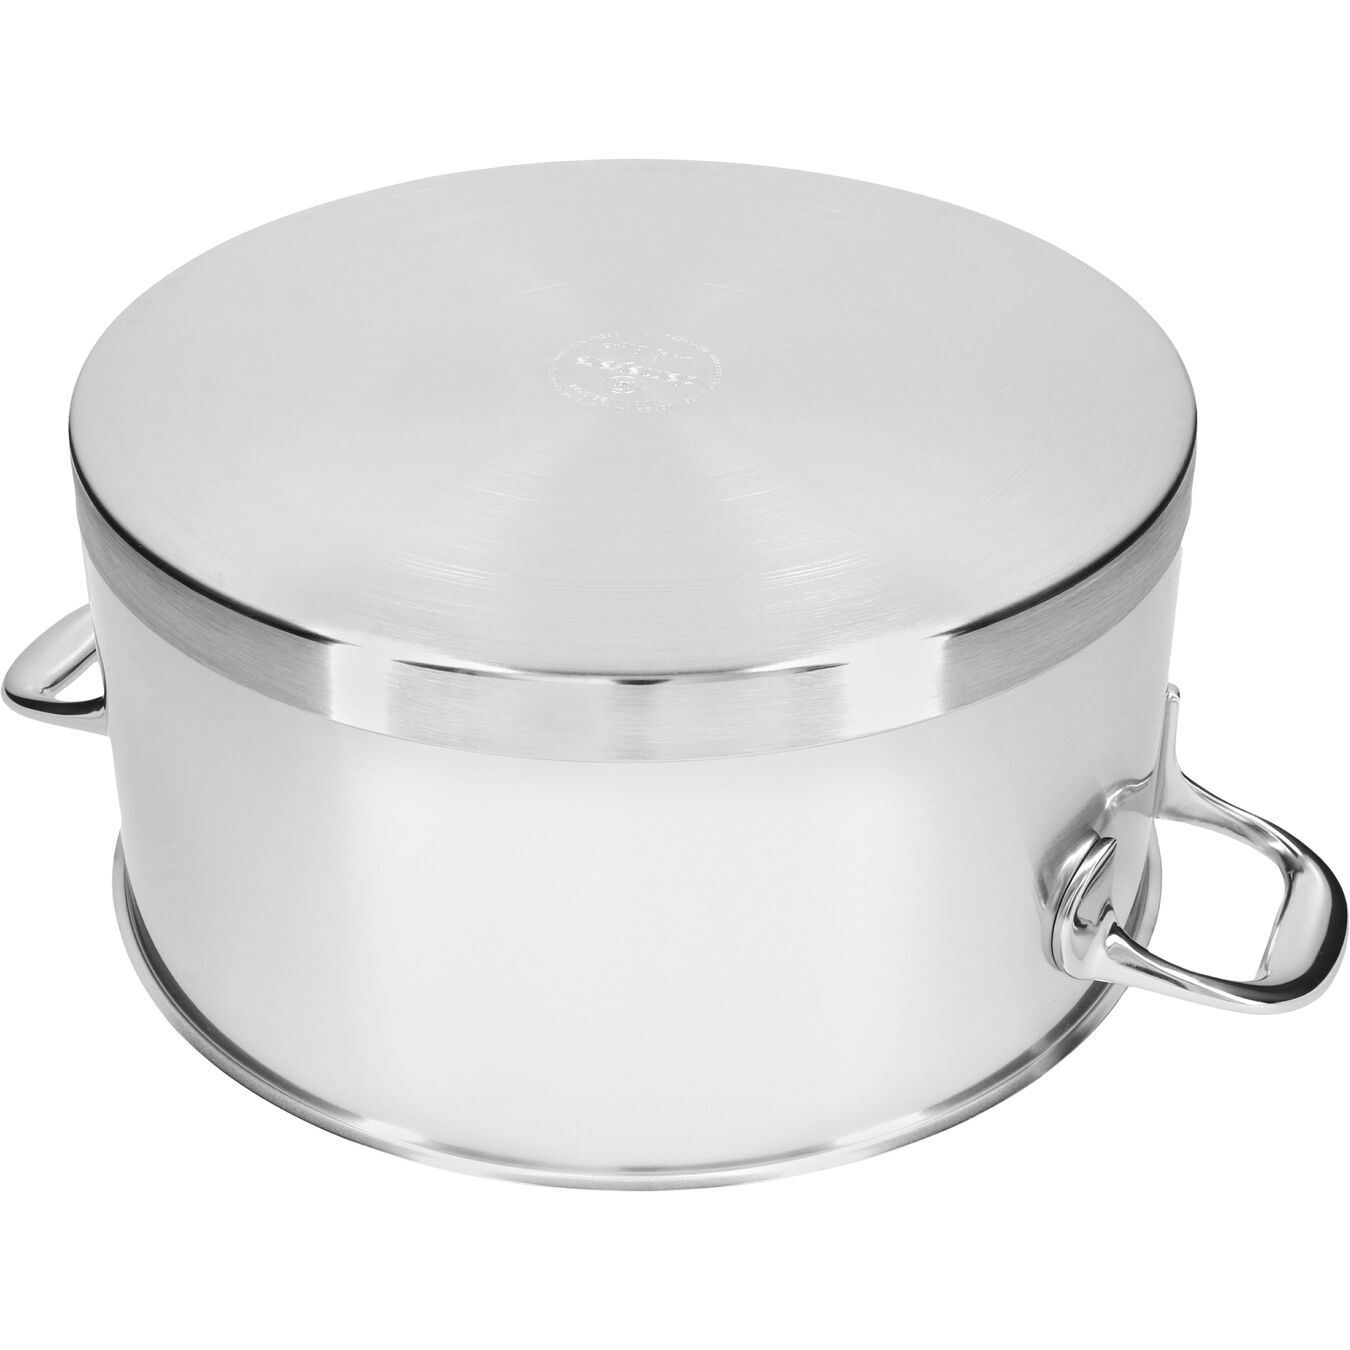 8.9 qt, 18/10 Stainless Steel, Dutch Oven with Lid,,large 5